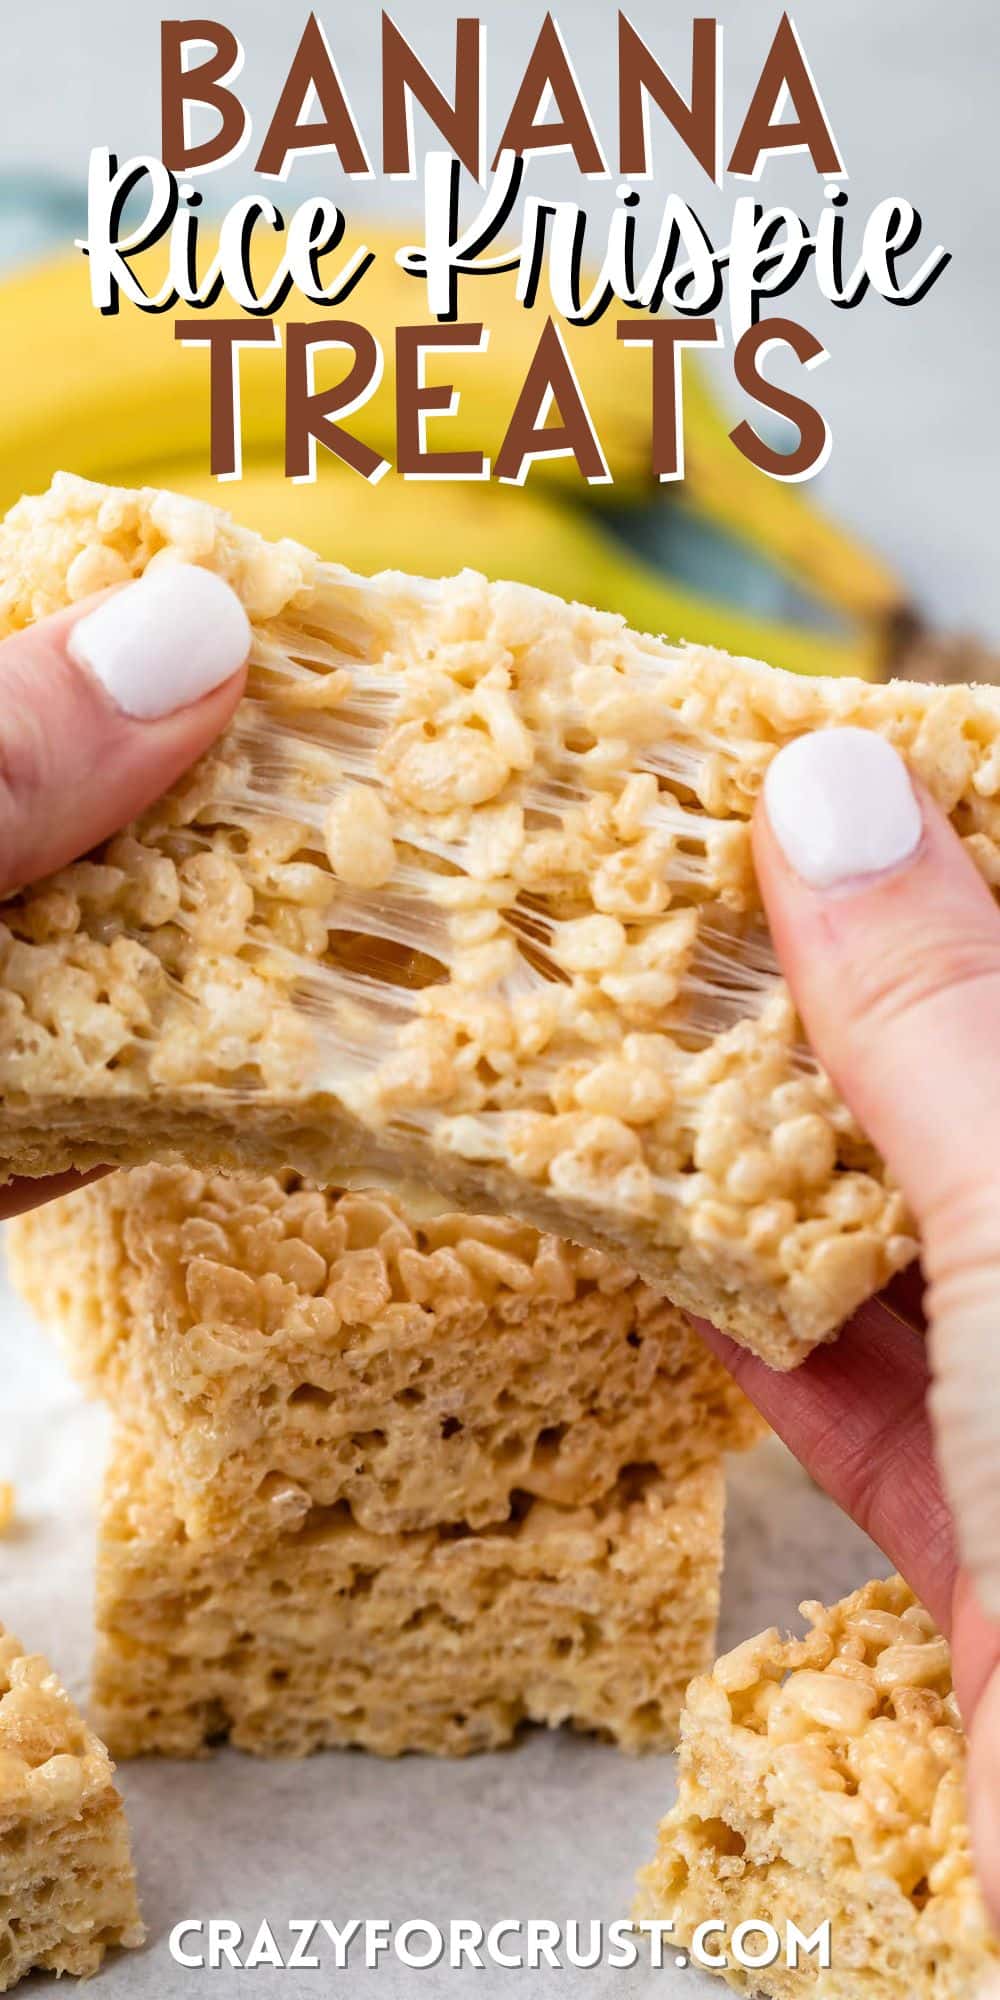 Rice Krispie Treats being torn apart with two hands and with a banana in the background with words on the image.